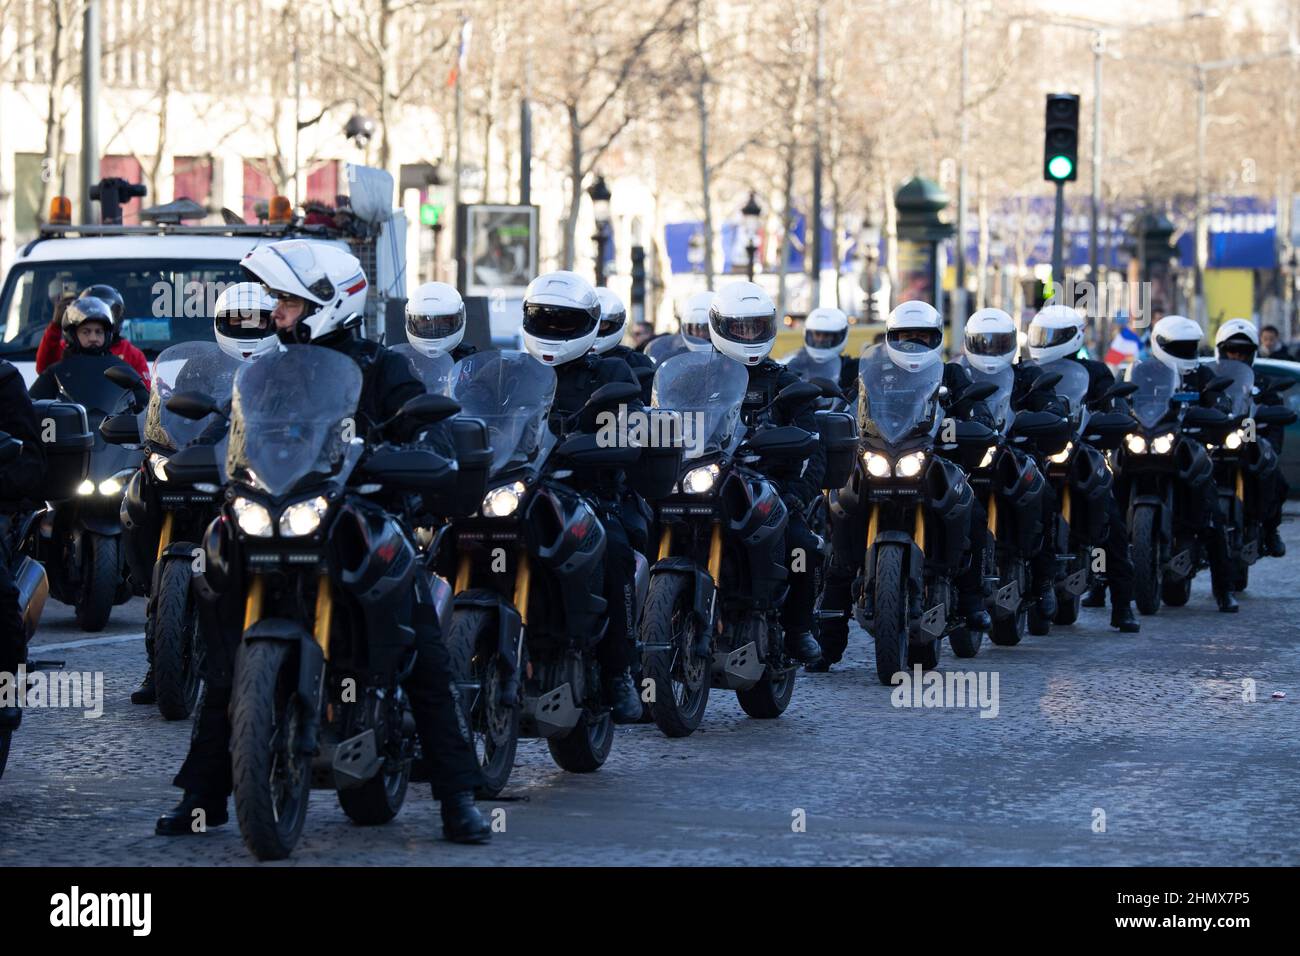 Polices Forces riding motorbikes on the Champs Elysees in Paris near the Arc de Triomphe on February 12, 2022 as convoys of protesters so called Convoi de la Liberte arrived in the French capital. Thousands of protesters in convoys, inspired by Canadian truckers paralysing border traffic with the US, were heading to Paris from across France on February 11, with some hoping to blockade the capital in opposition to Covid-19 restrictions despite police warnings to back off. The protesters include many anti-Covid vaccination activists, but also people protesting against fast-rising energy prices t Stock Photo